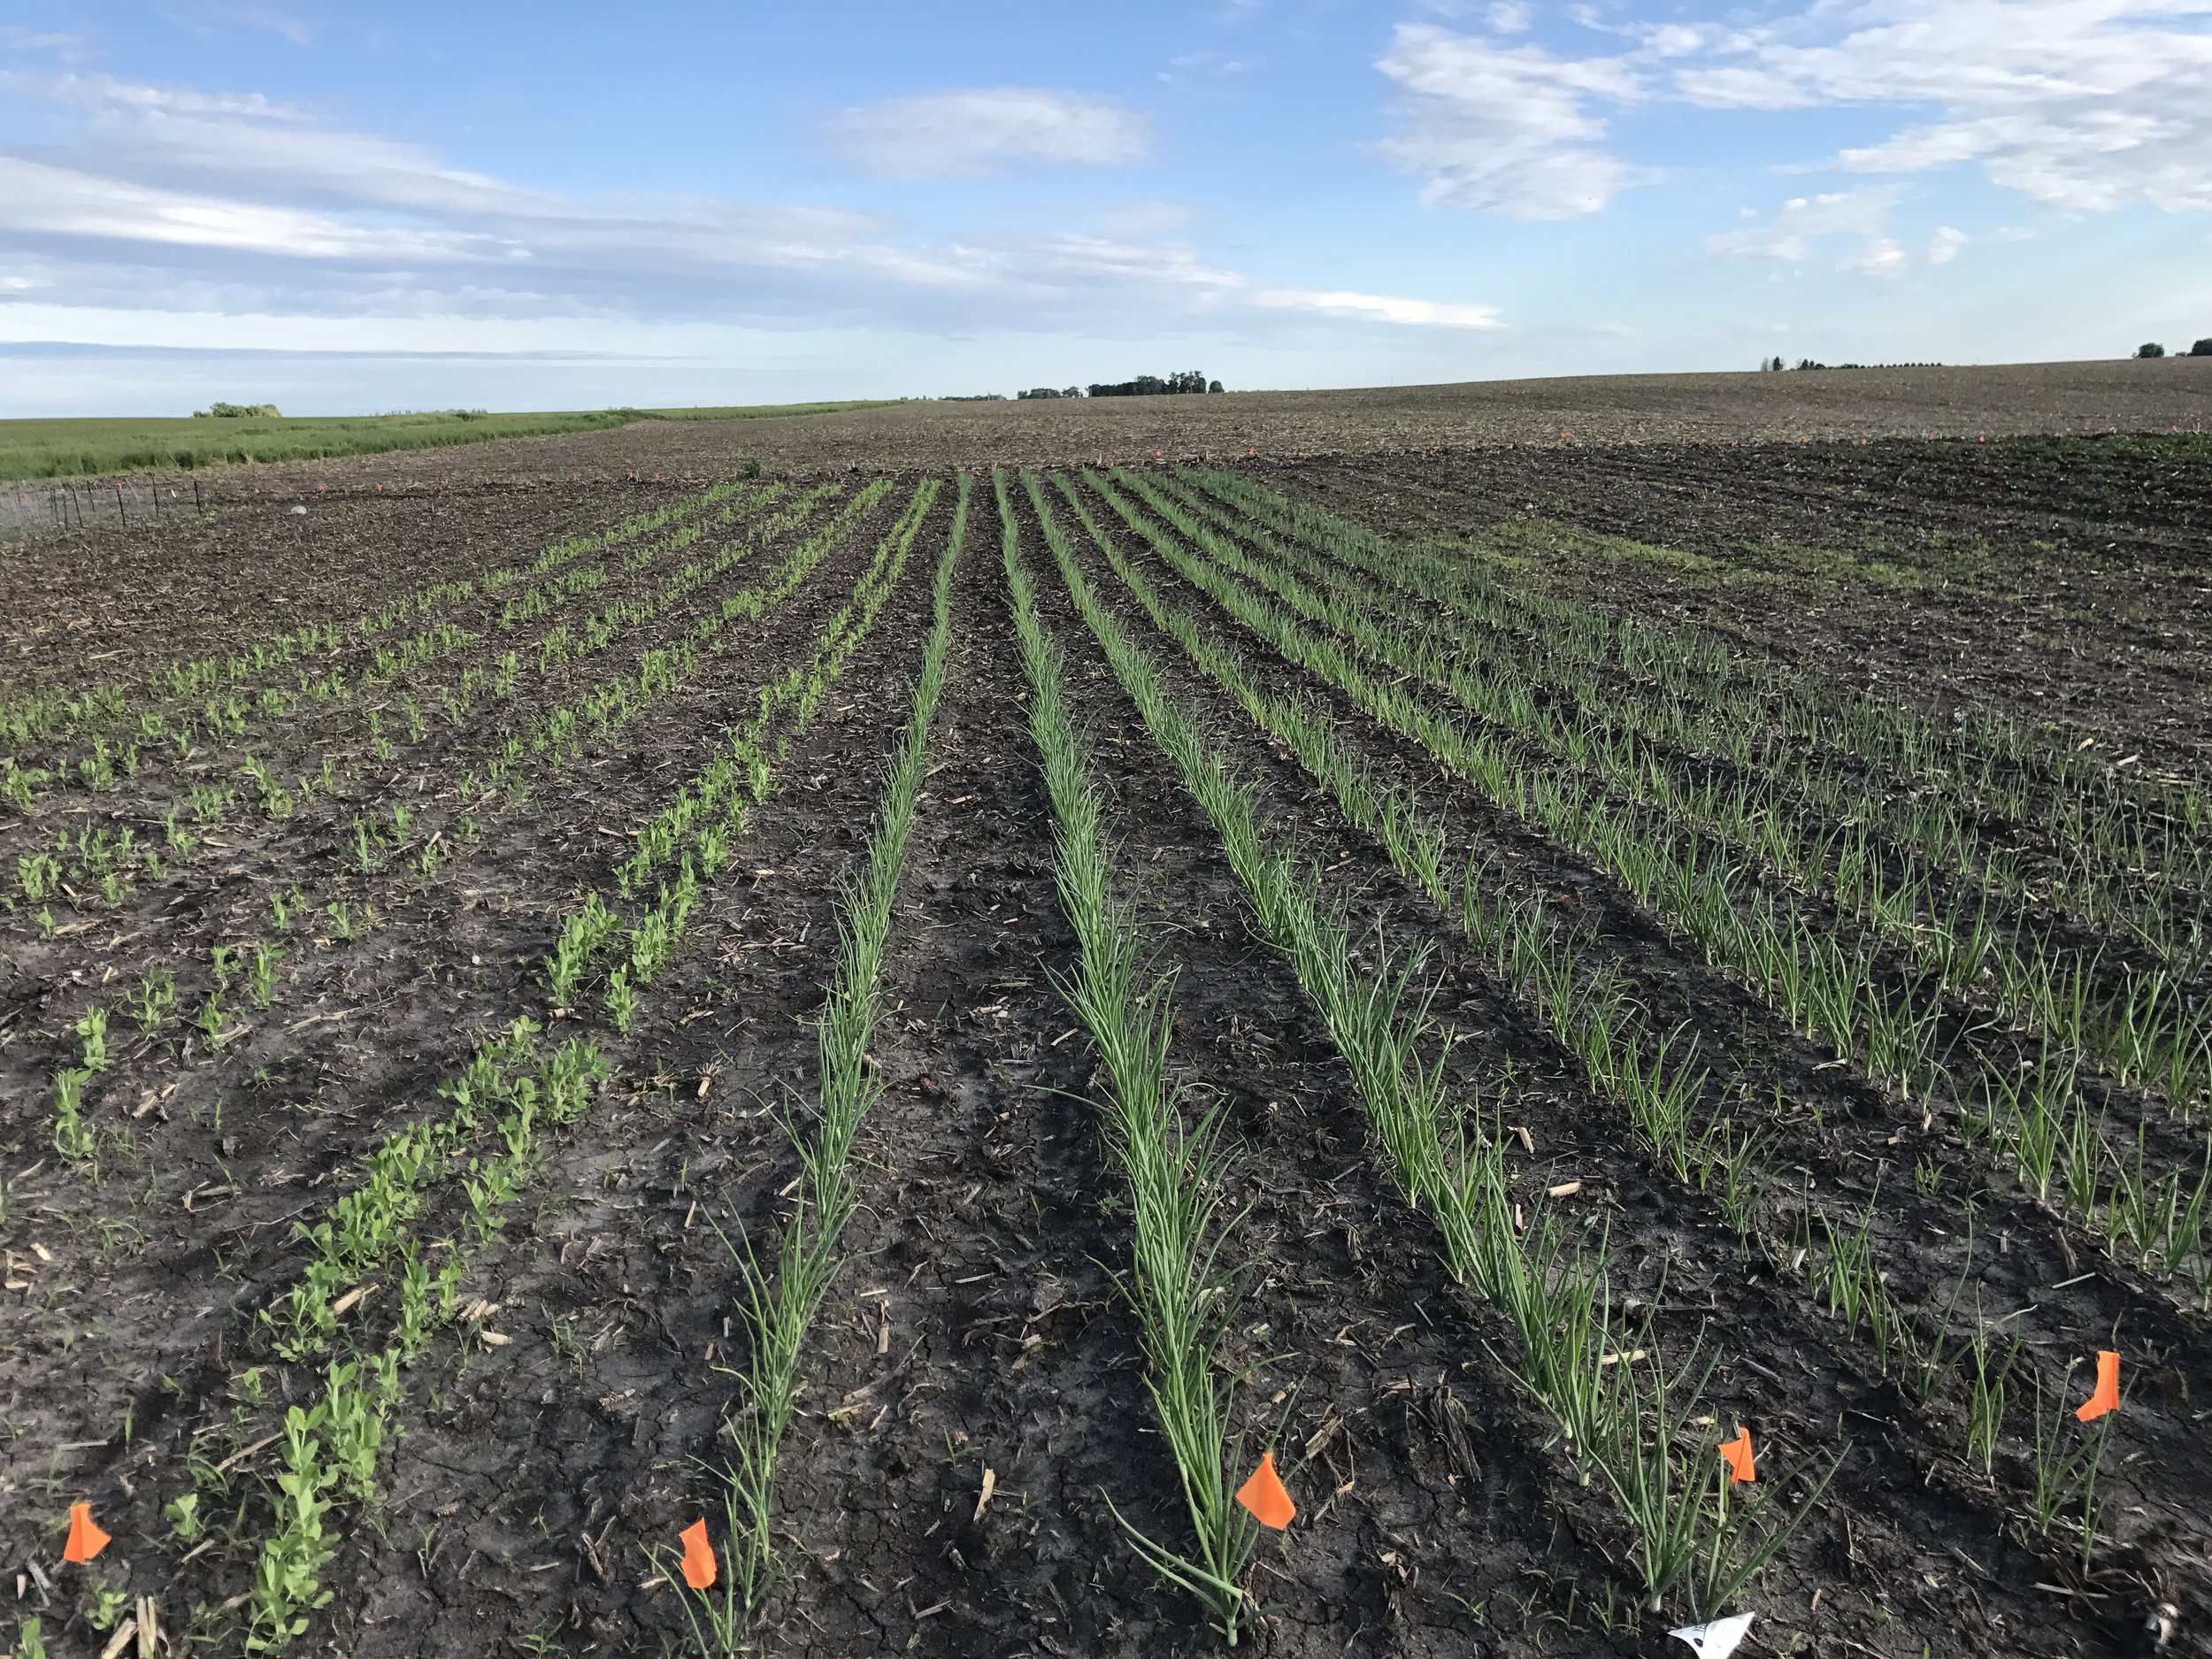  On the right are our rows of onions - they look absolutely beautiful! To the left are sugar snap peas. 